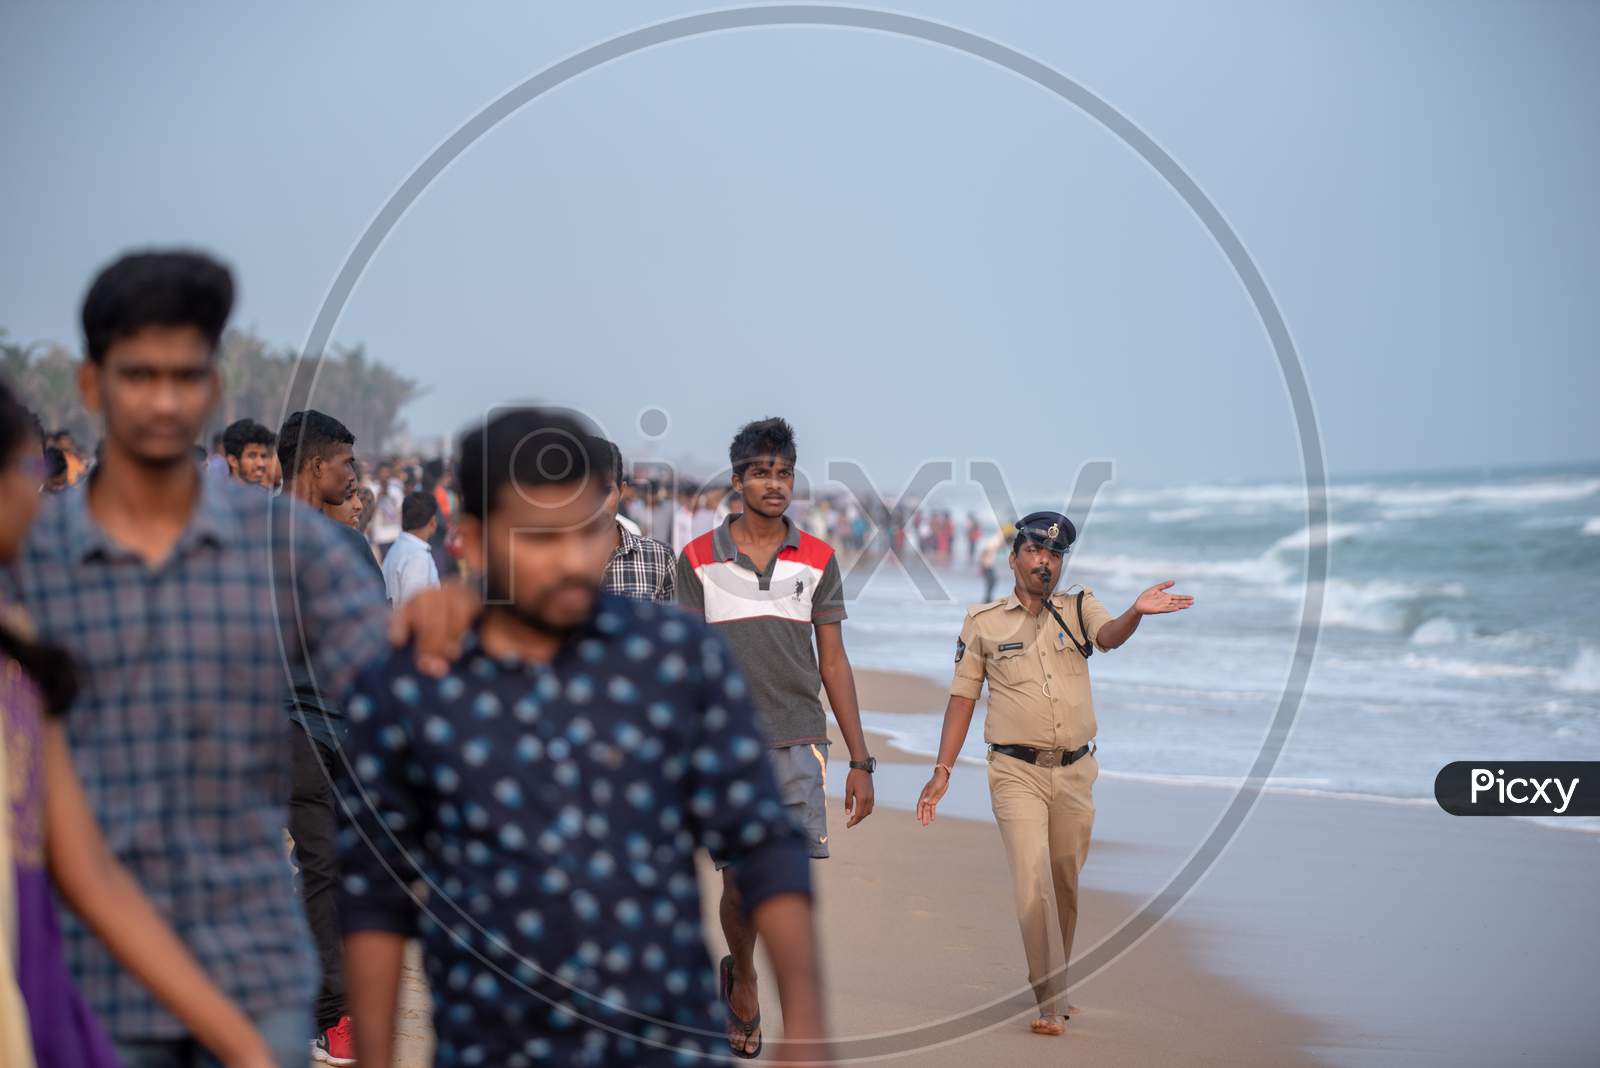 Police Protection During Indian Navy Day Celebrations At Visakhapatnam December 4 2019